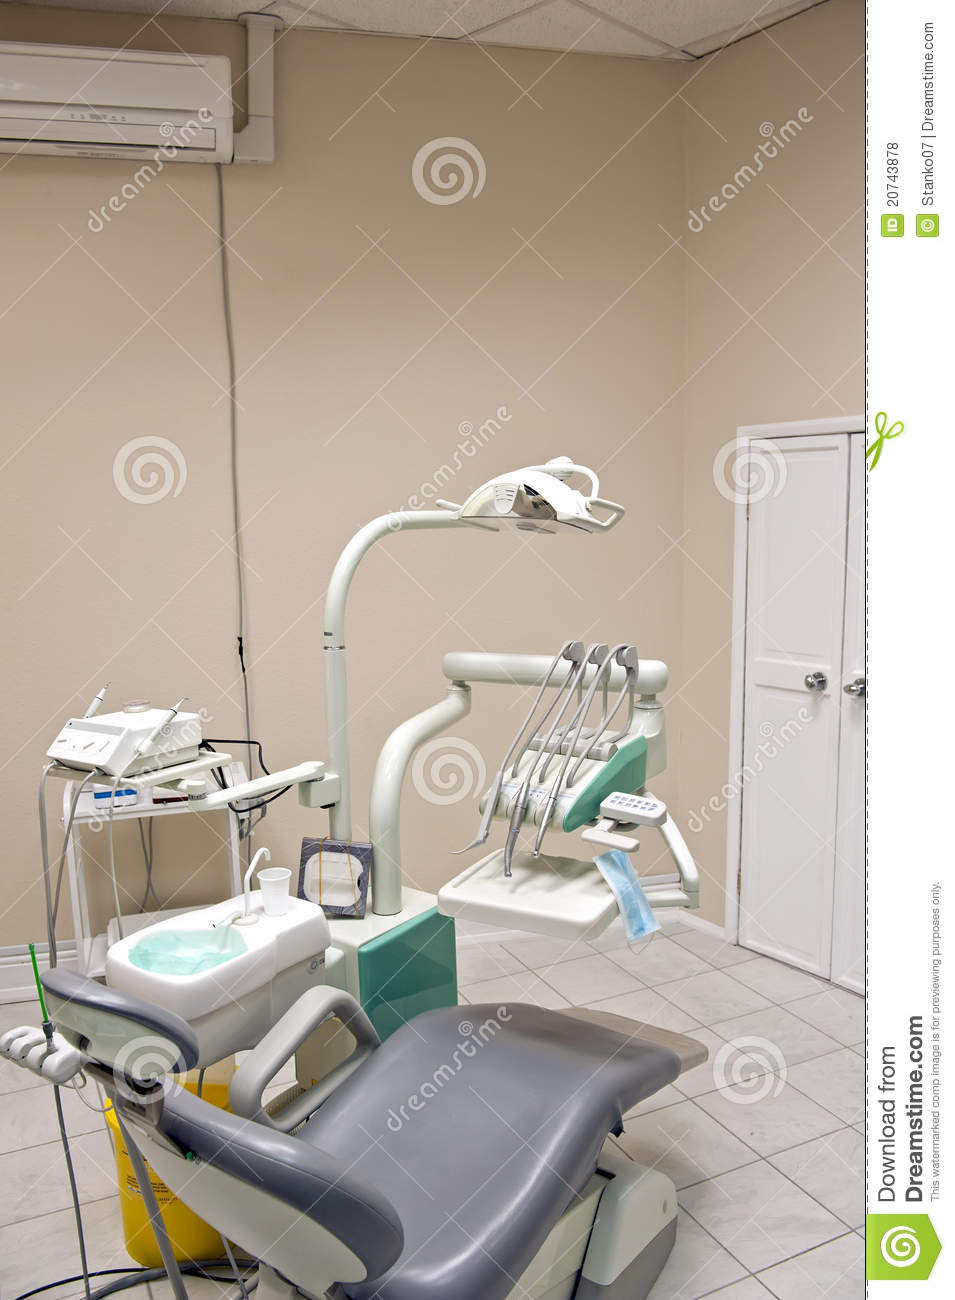 Dentist Office Royalty Free Stock Photos   Image  20743878